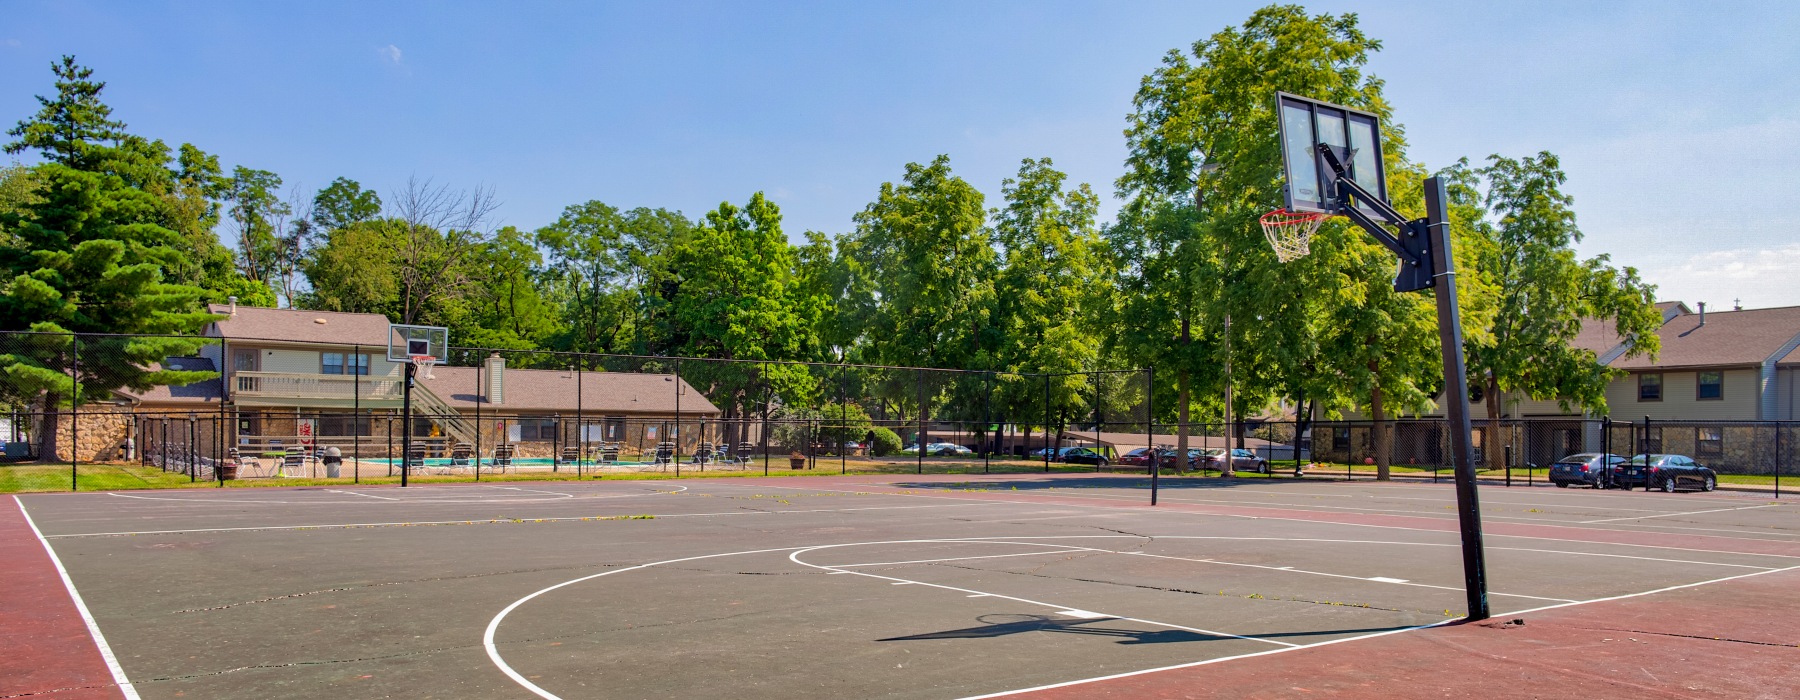 Outdoor basketball court with trees